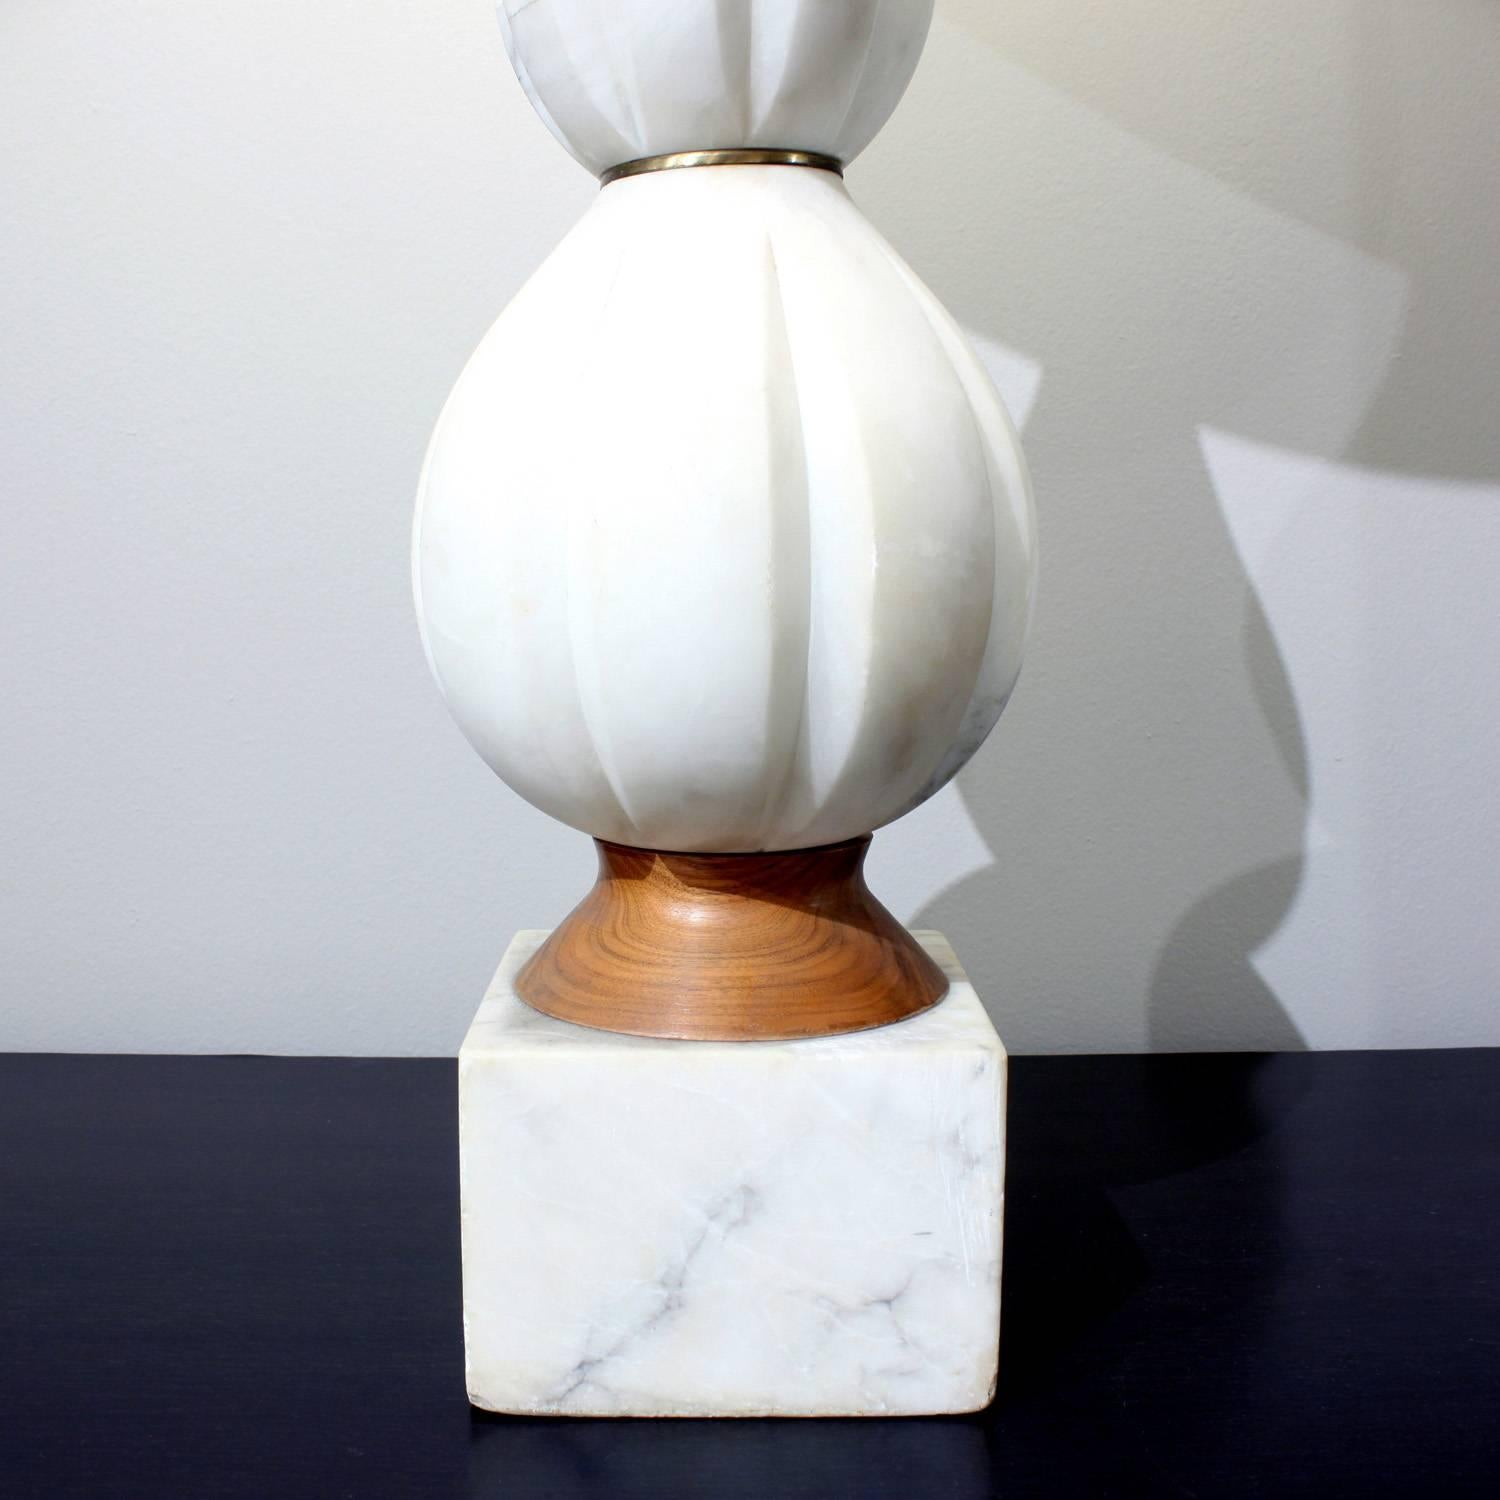 Hand-carved white alabaster table lamp on marble base with wood accent, Italian, 1960s.